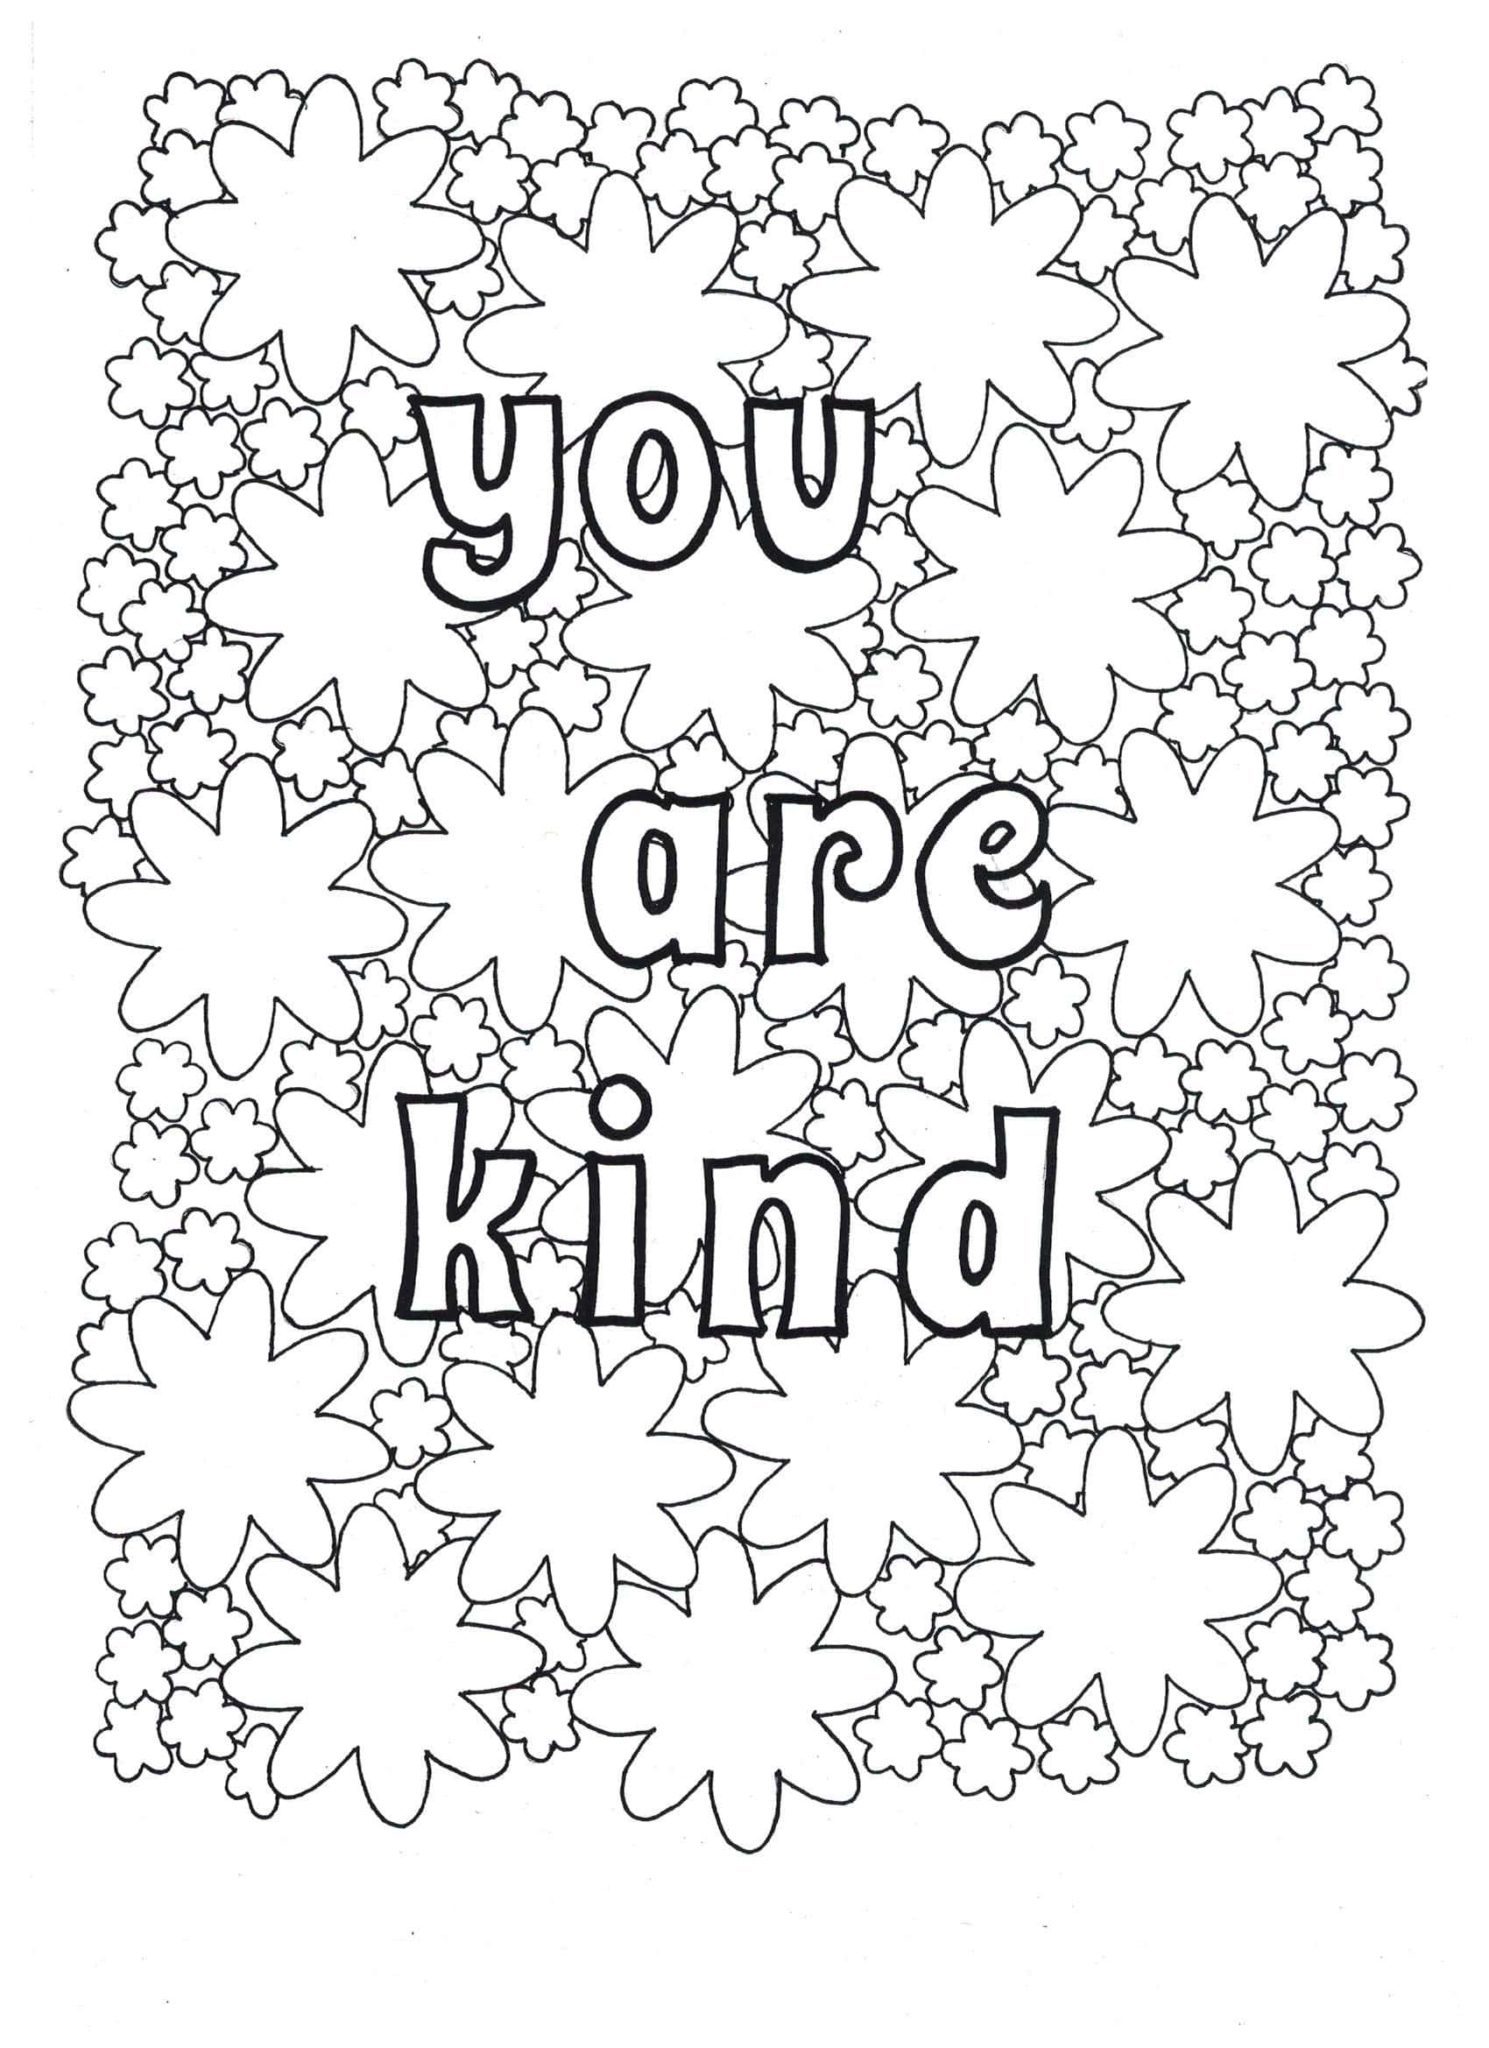 kindness coloring pages pdf | throw kindness like confetti coloring page | kindness quotes